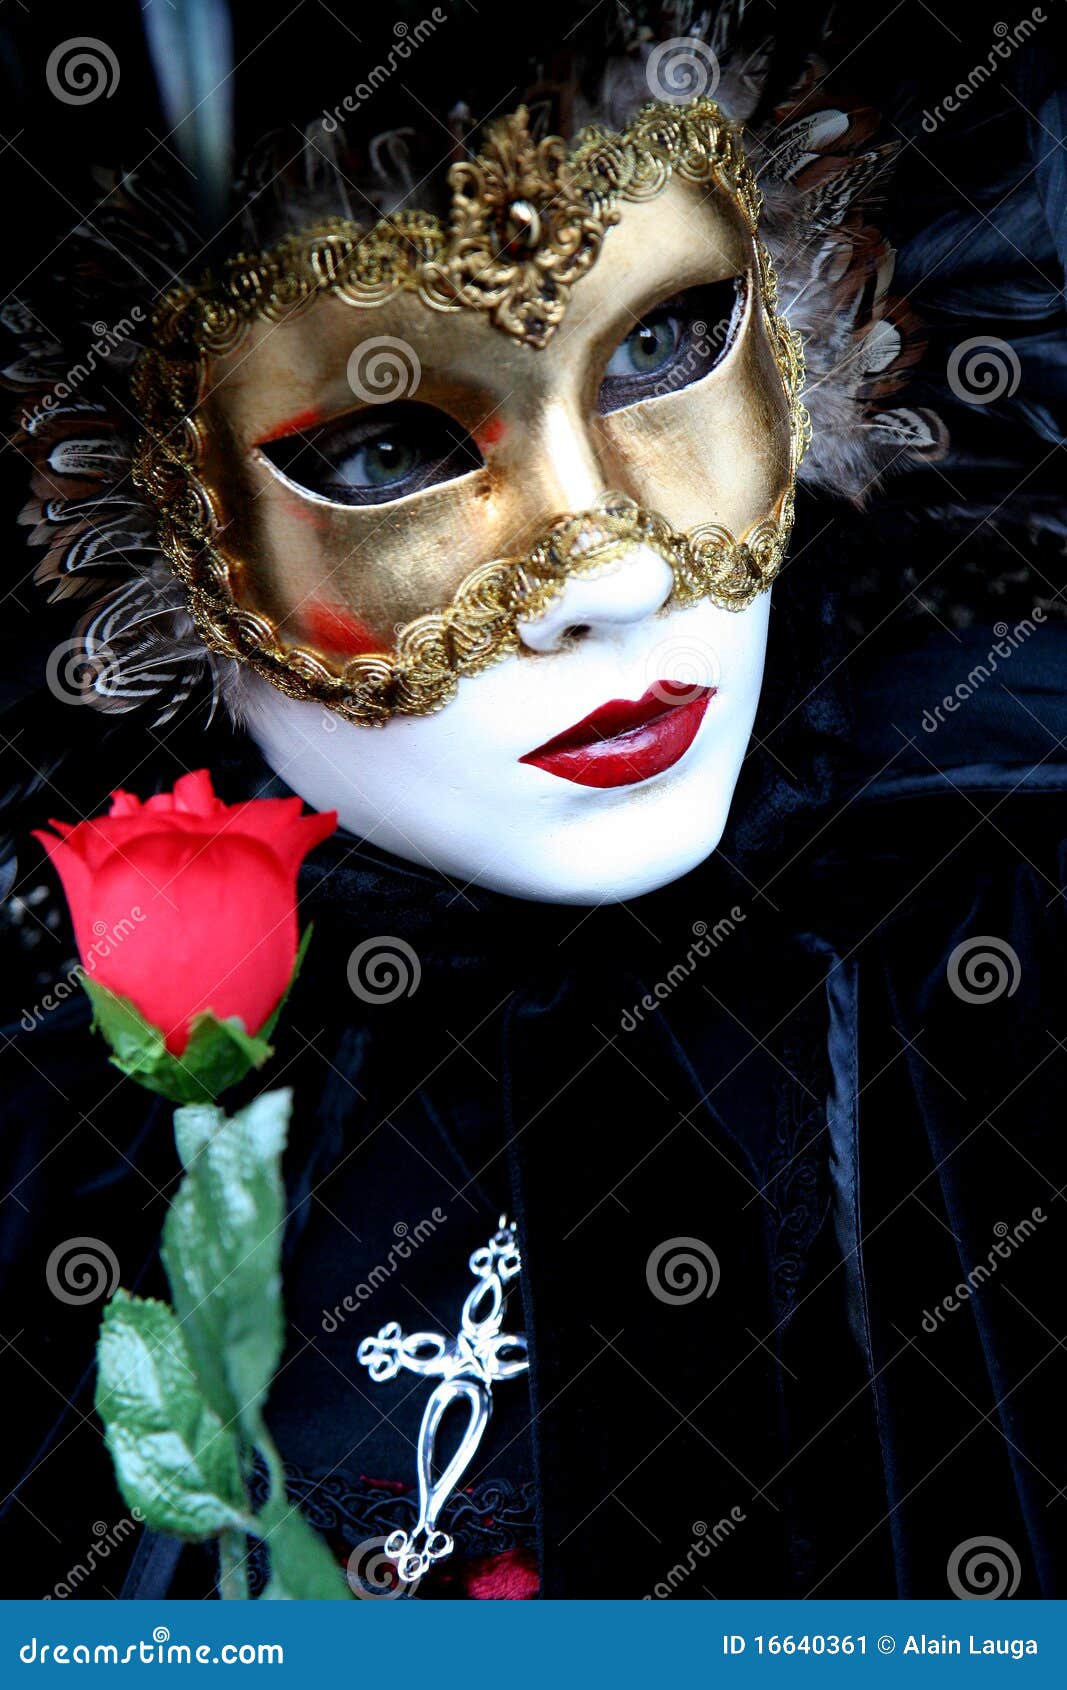 Lady with a rose stock image. Image of drama, artistic - 16640361